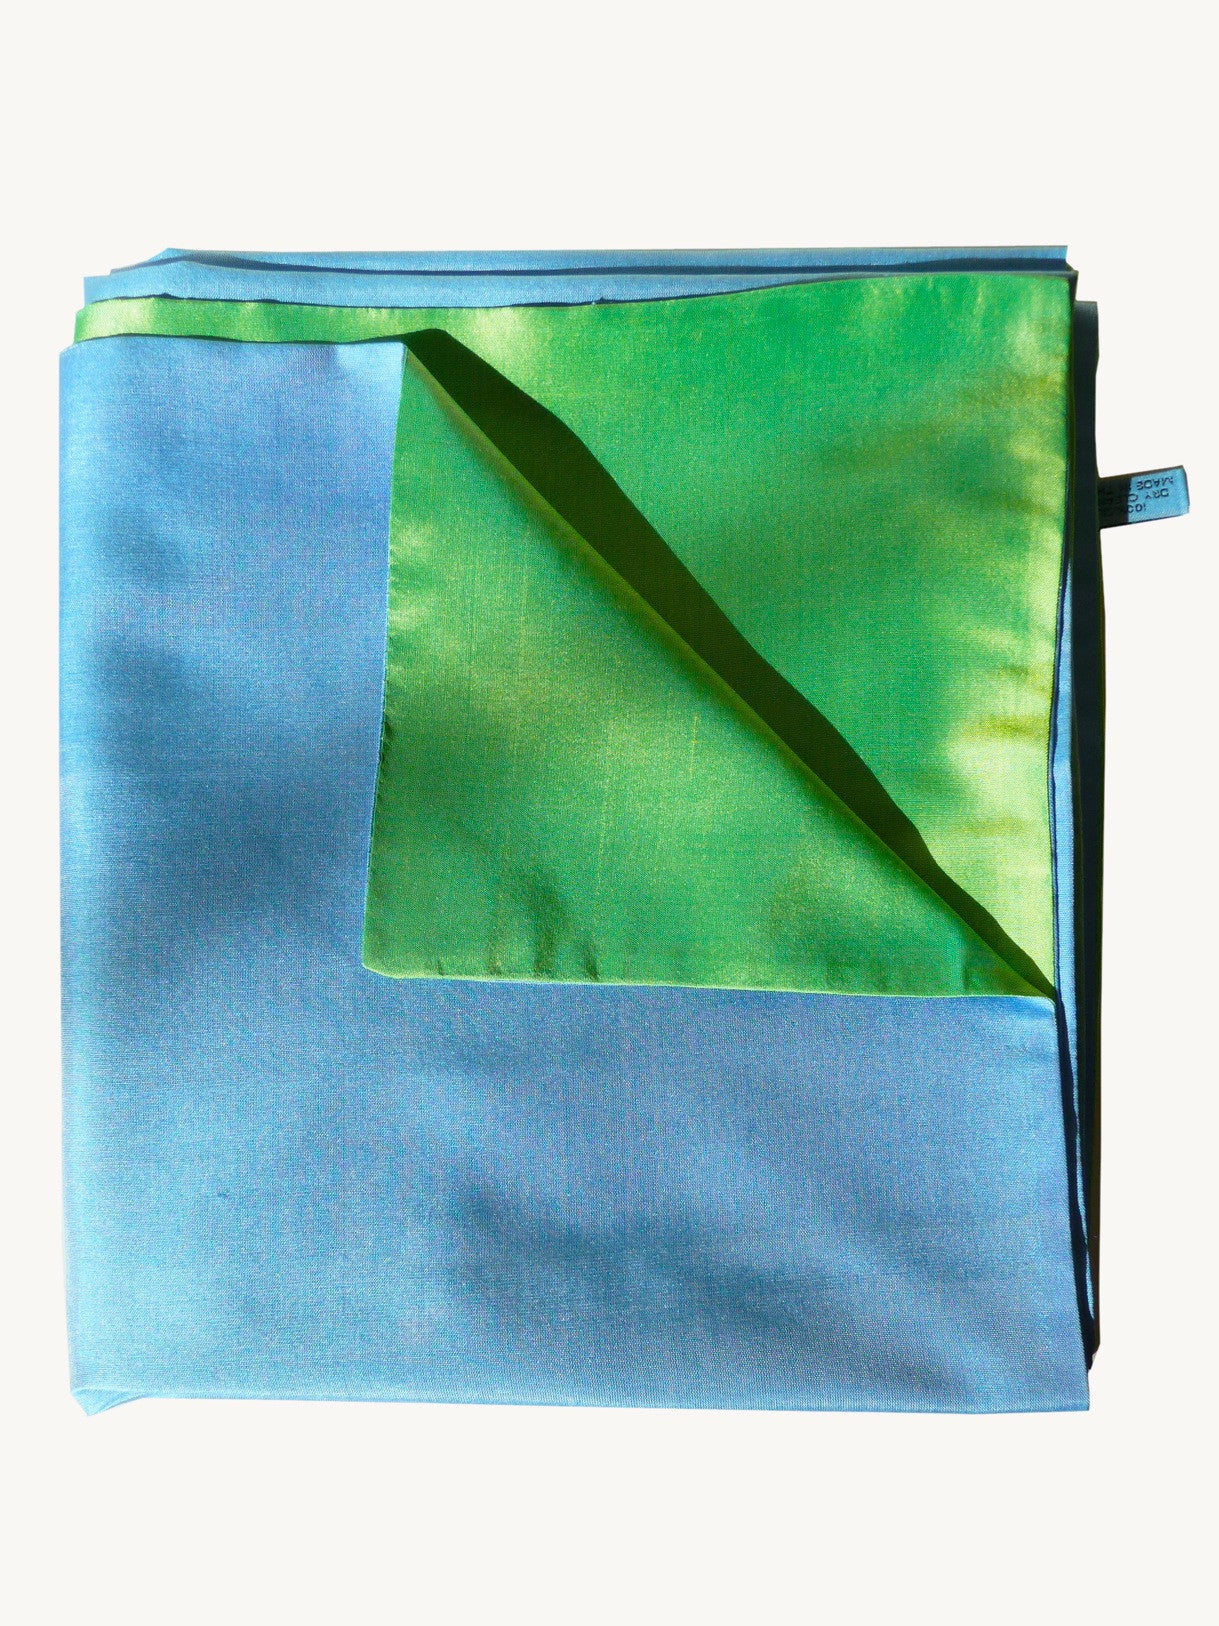 Double Sided Evening Shawl Blue Green Combinations